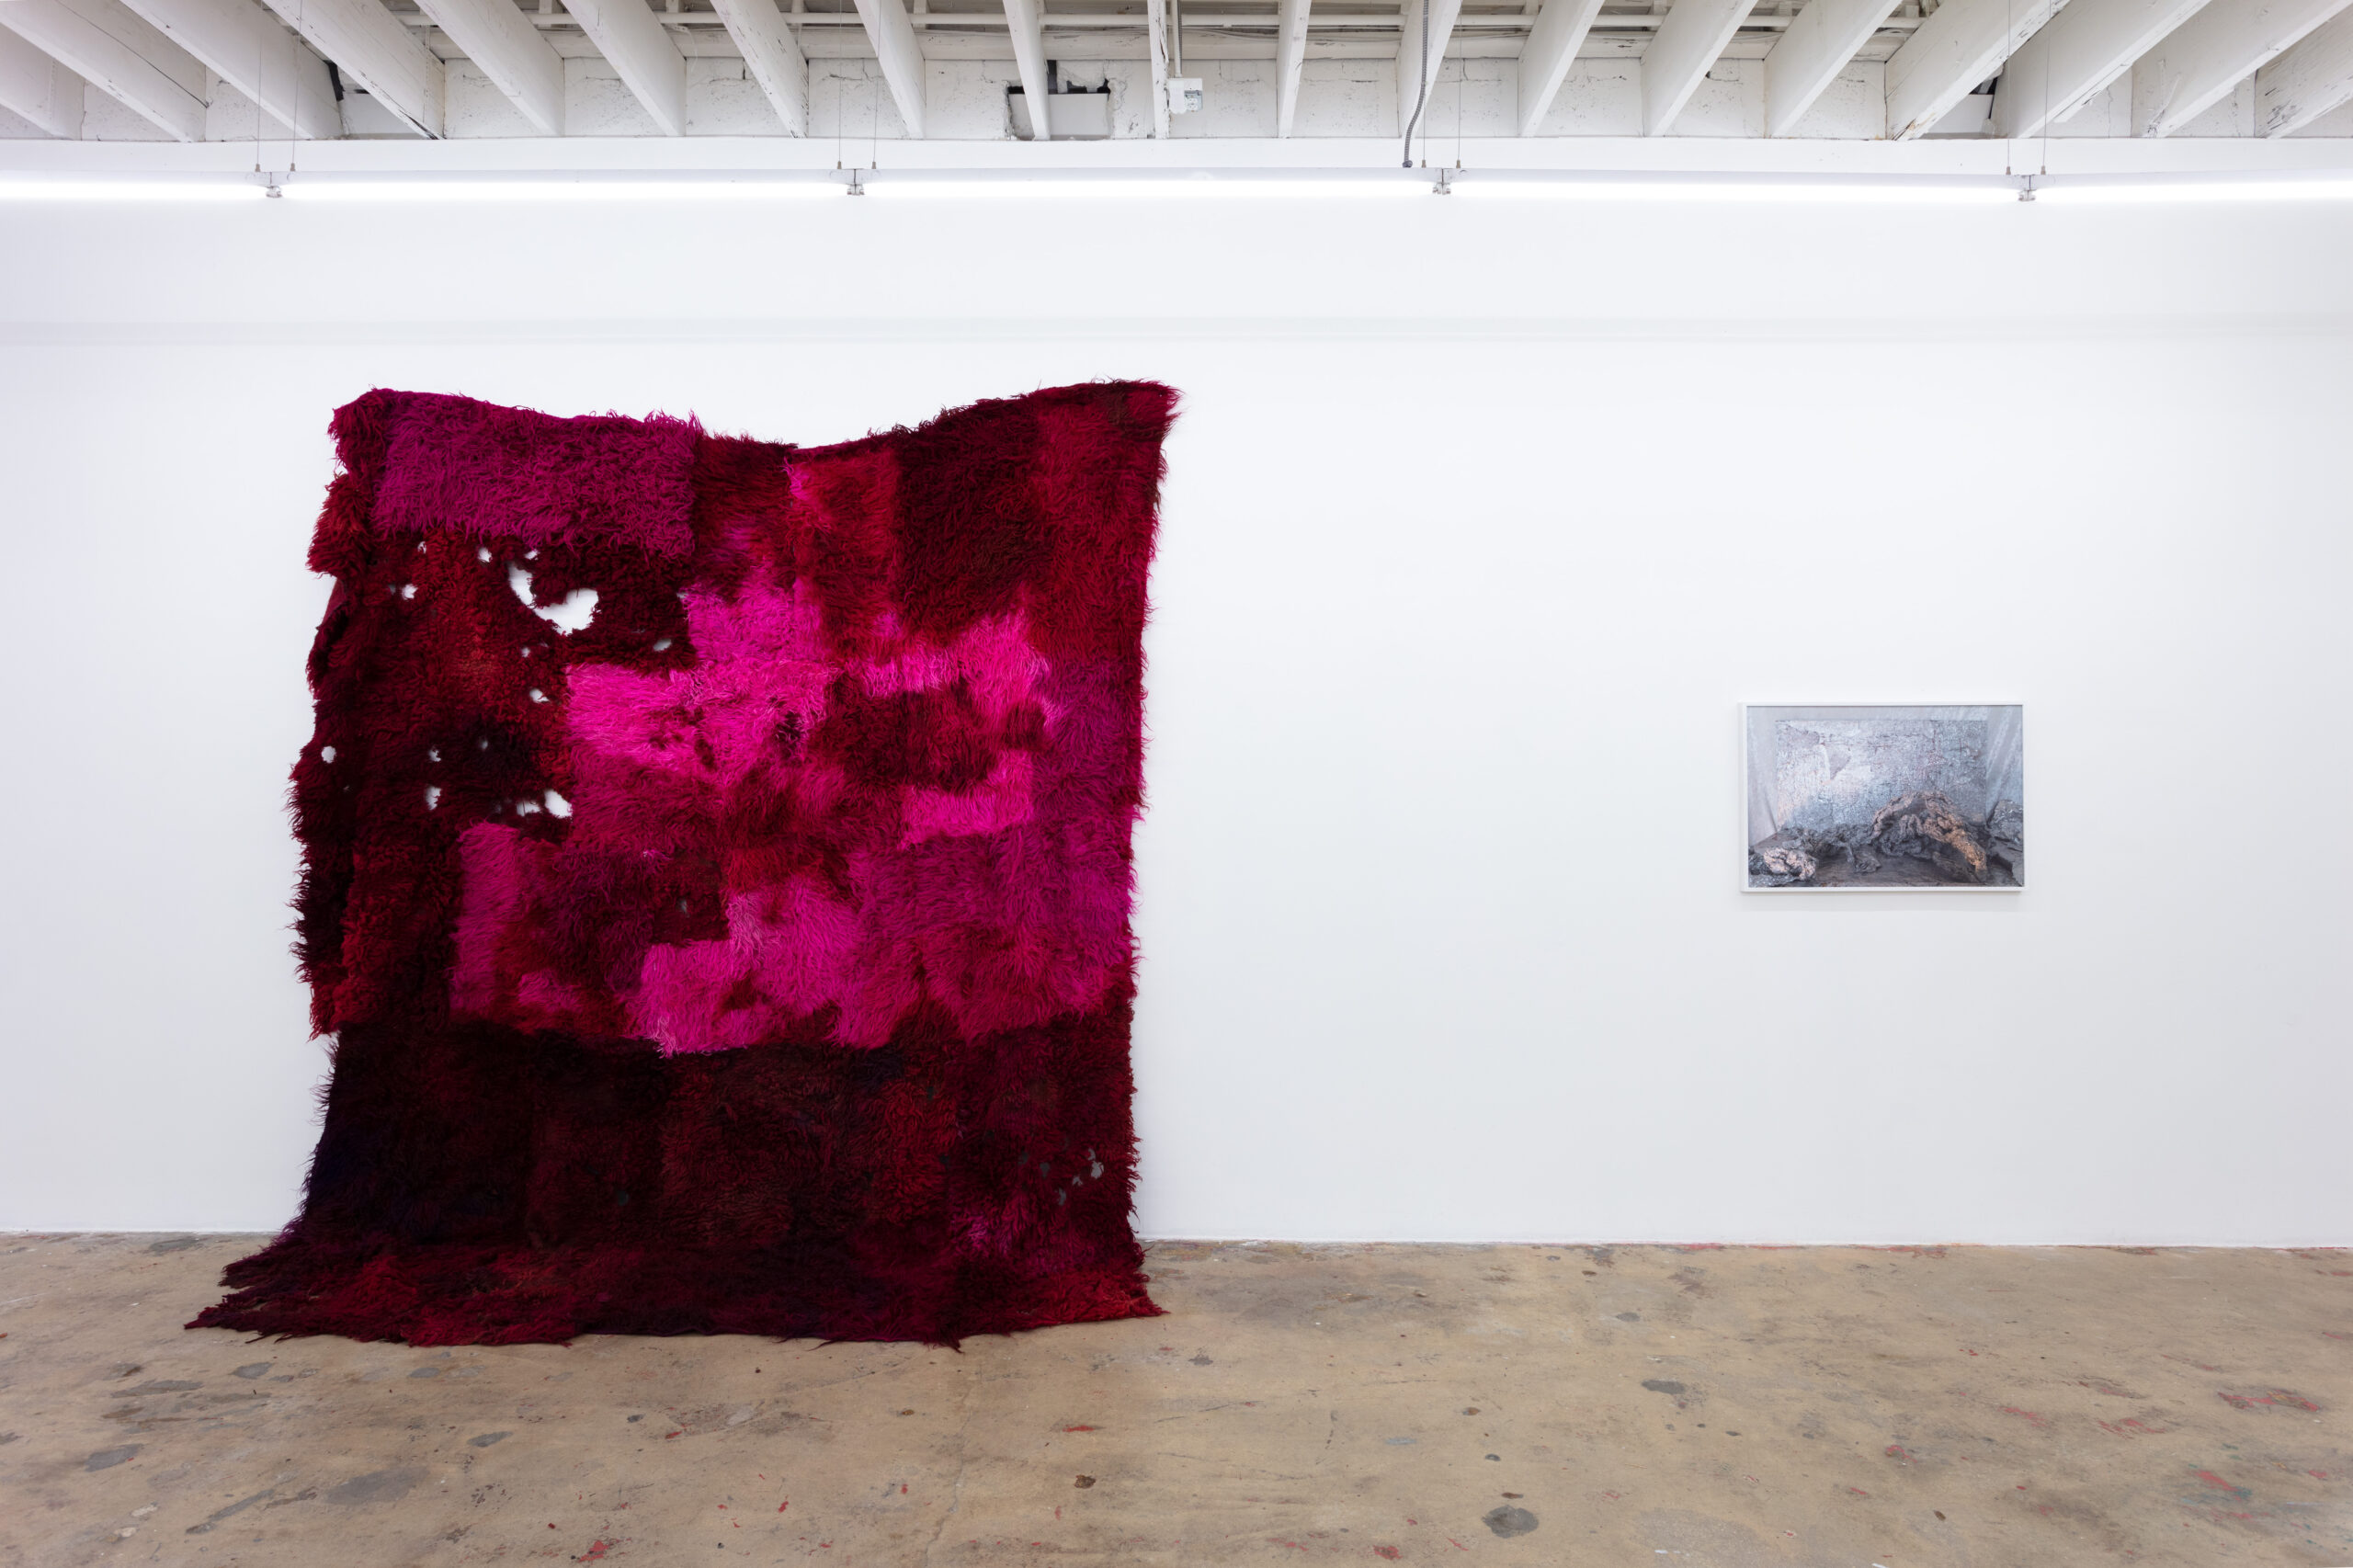 Anna Betbeze, Forms Like Dreams, installation view